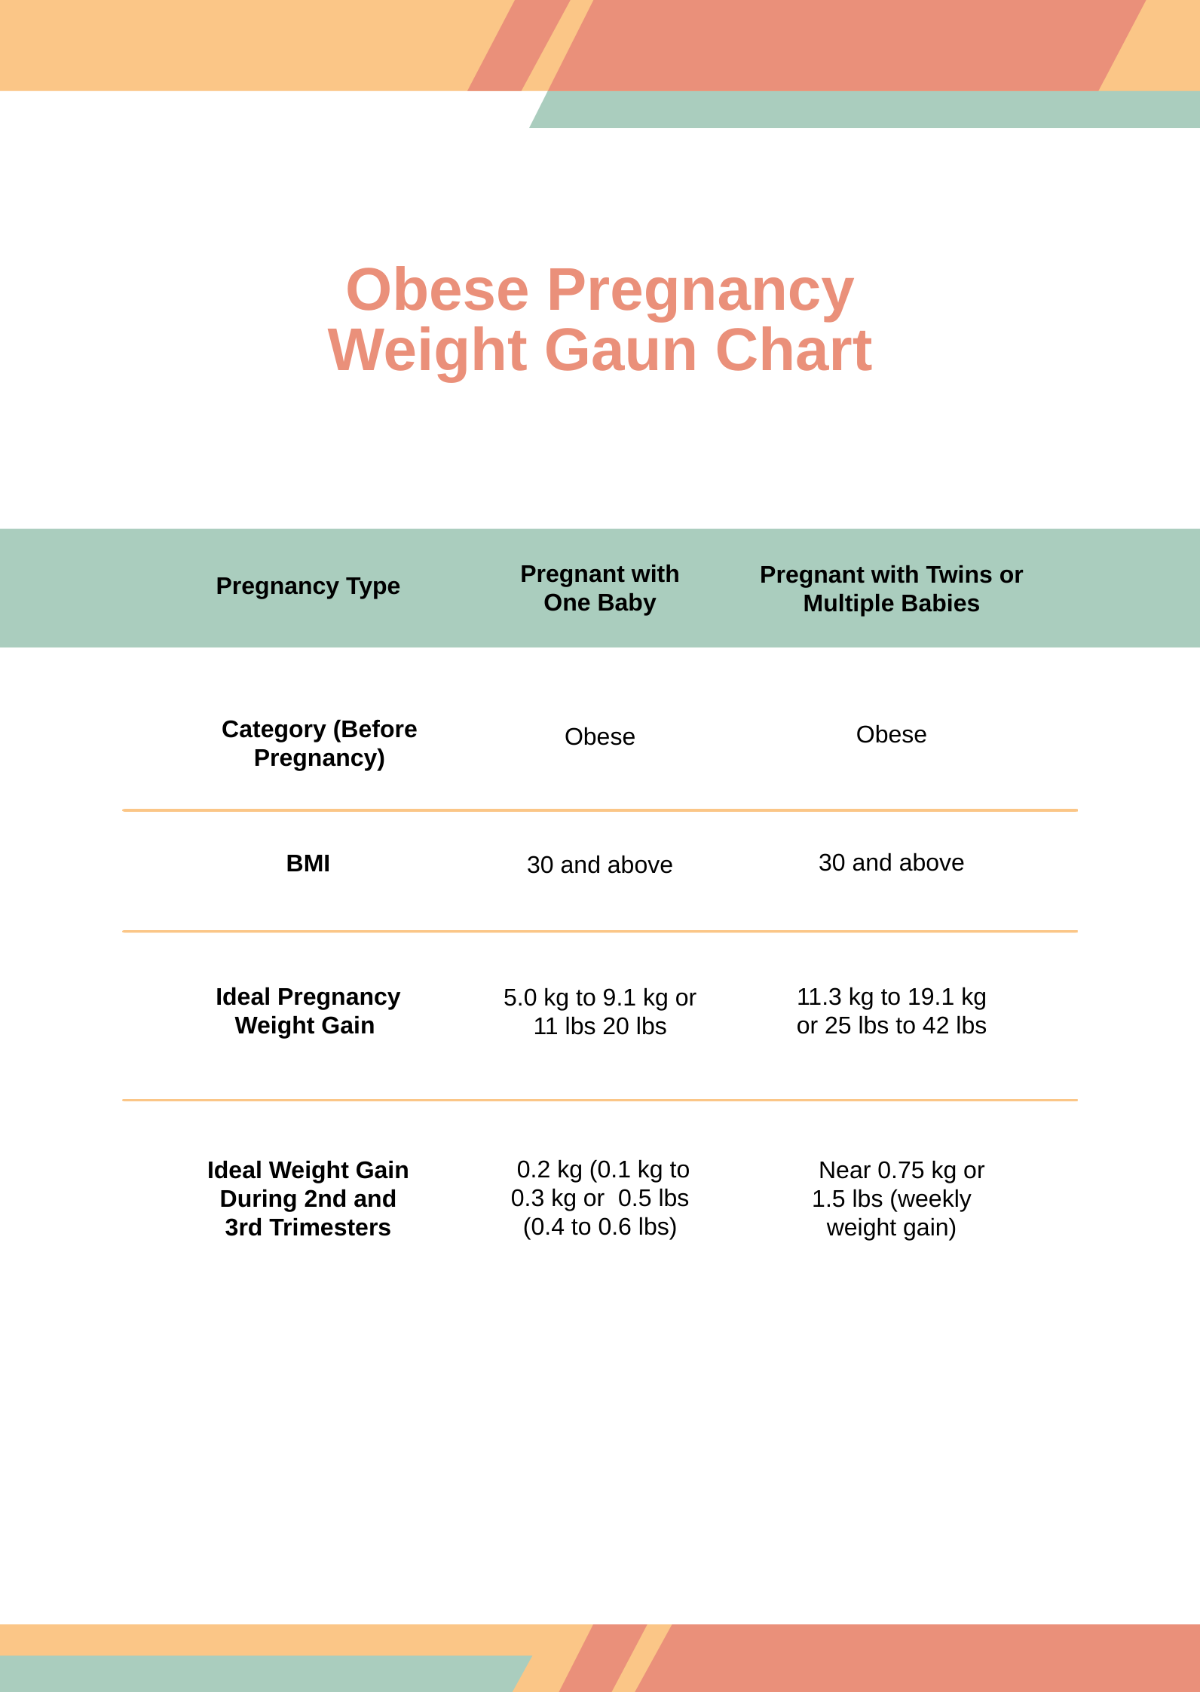 Obese Pregnancy Weight Gain Chart